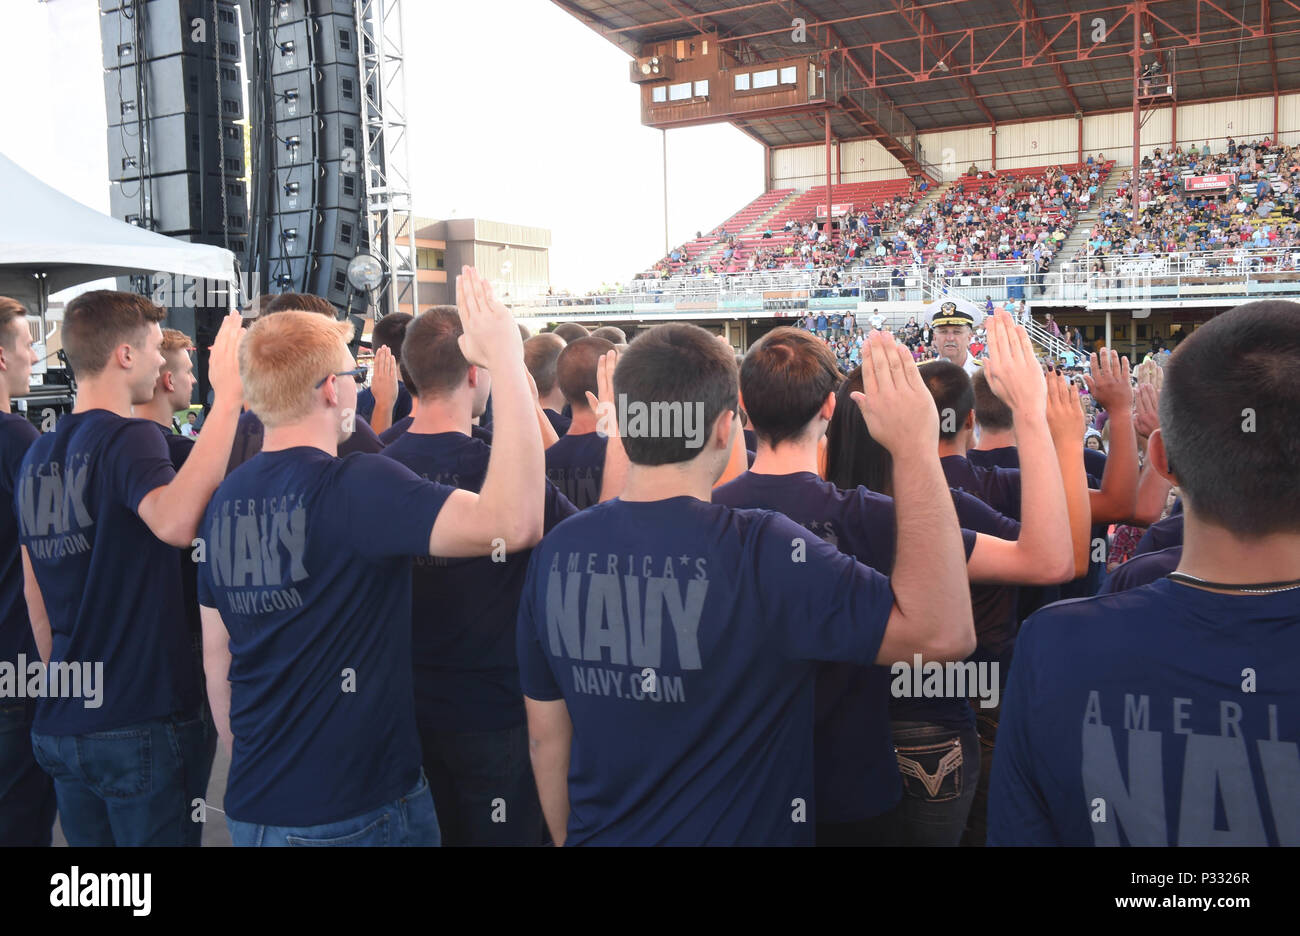 160823-N-CM227-134 BOISE, Idaho (Aug. 23, 2016) Rear Adm. Bruce Gillingham, Commander, Navy Medicine West administers the oath of enlistment to 40 Delayed Entry Program members from Naval Recruiting District Portland during the Western Idaho Fair as part of Boise Navy Week. Navy Weeks focus a variety of outreach assets, equipment and personnel on a single city for a weeklong series of engagements with key influencers andorganizations. (U.S. Navy Photo by Mass Communication Specialist 1stClass Marie A. Montez/Released) Stock Photo